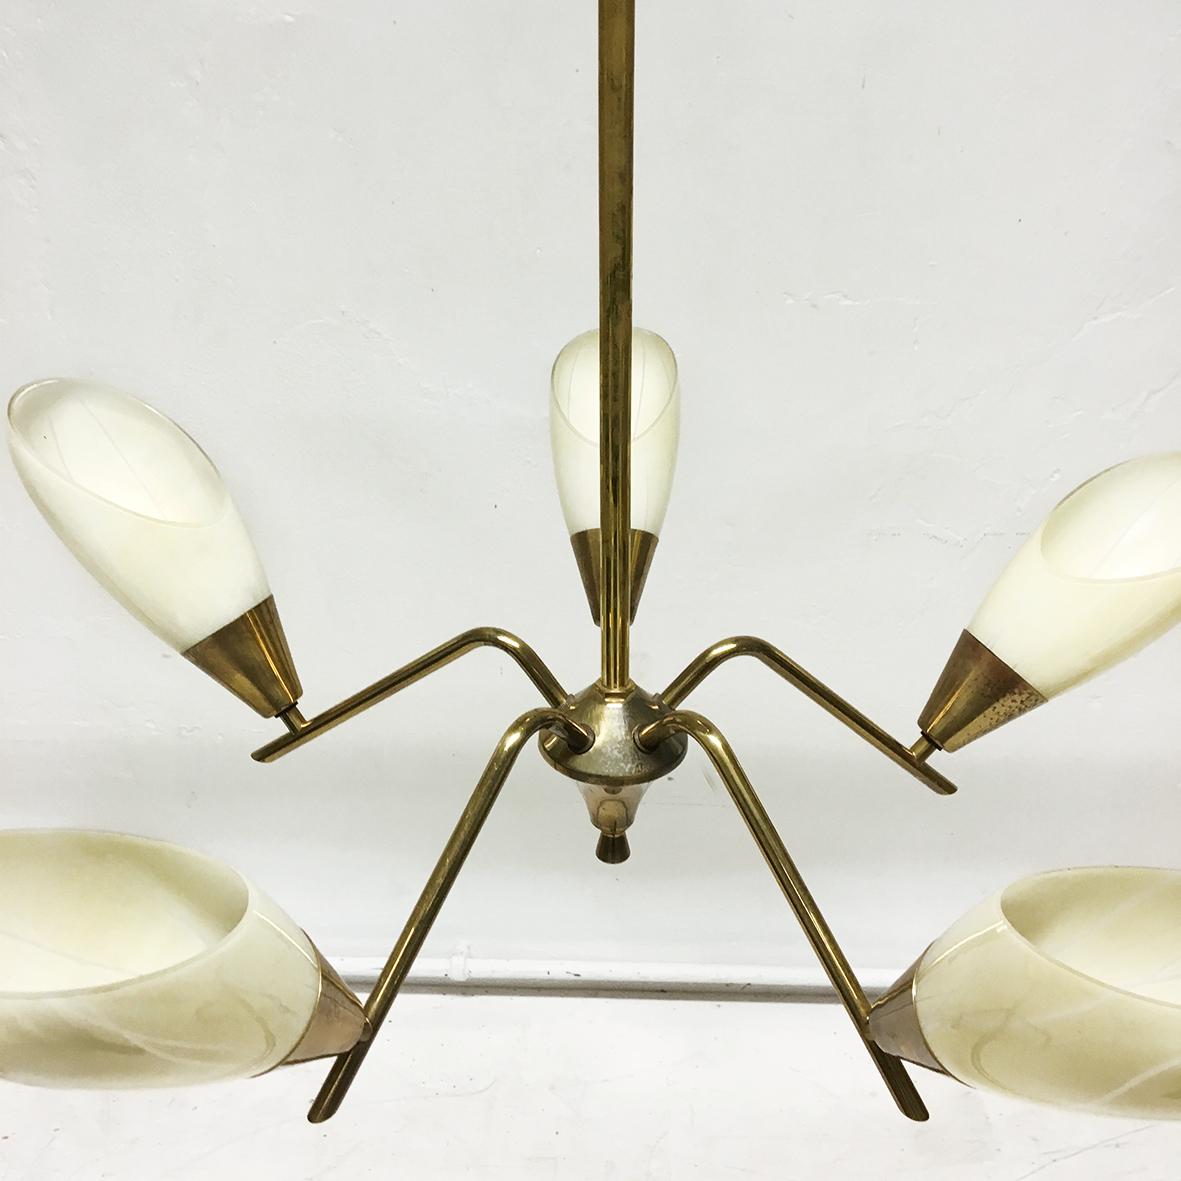 Elegant midcentury 1950s Italian five branch brass and glass ceiling light, chandelier, pendant. It has a solid brass frame supporting five pastel yellow shades, which have fine white pinstripes. When the five E14 bulb holders are lit, the shades